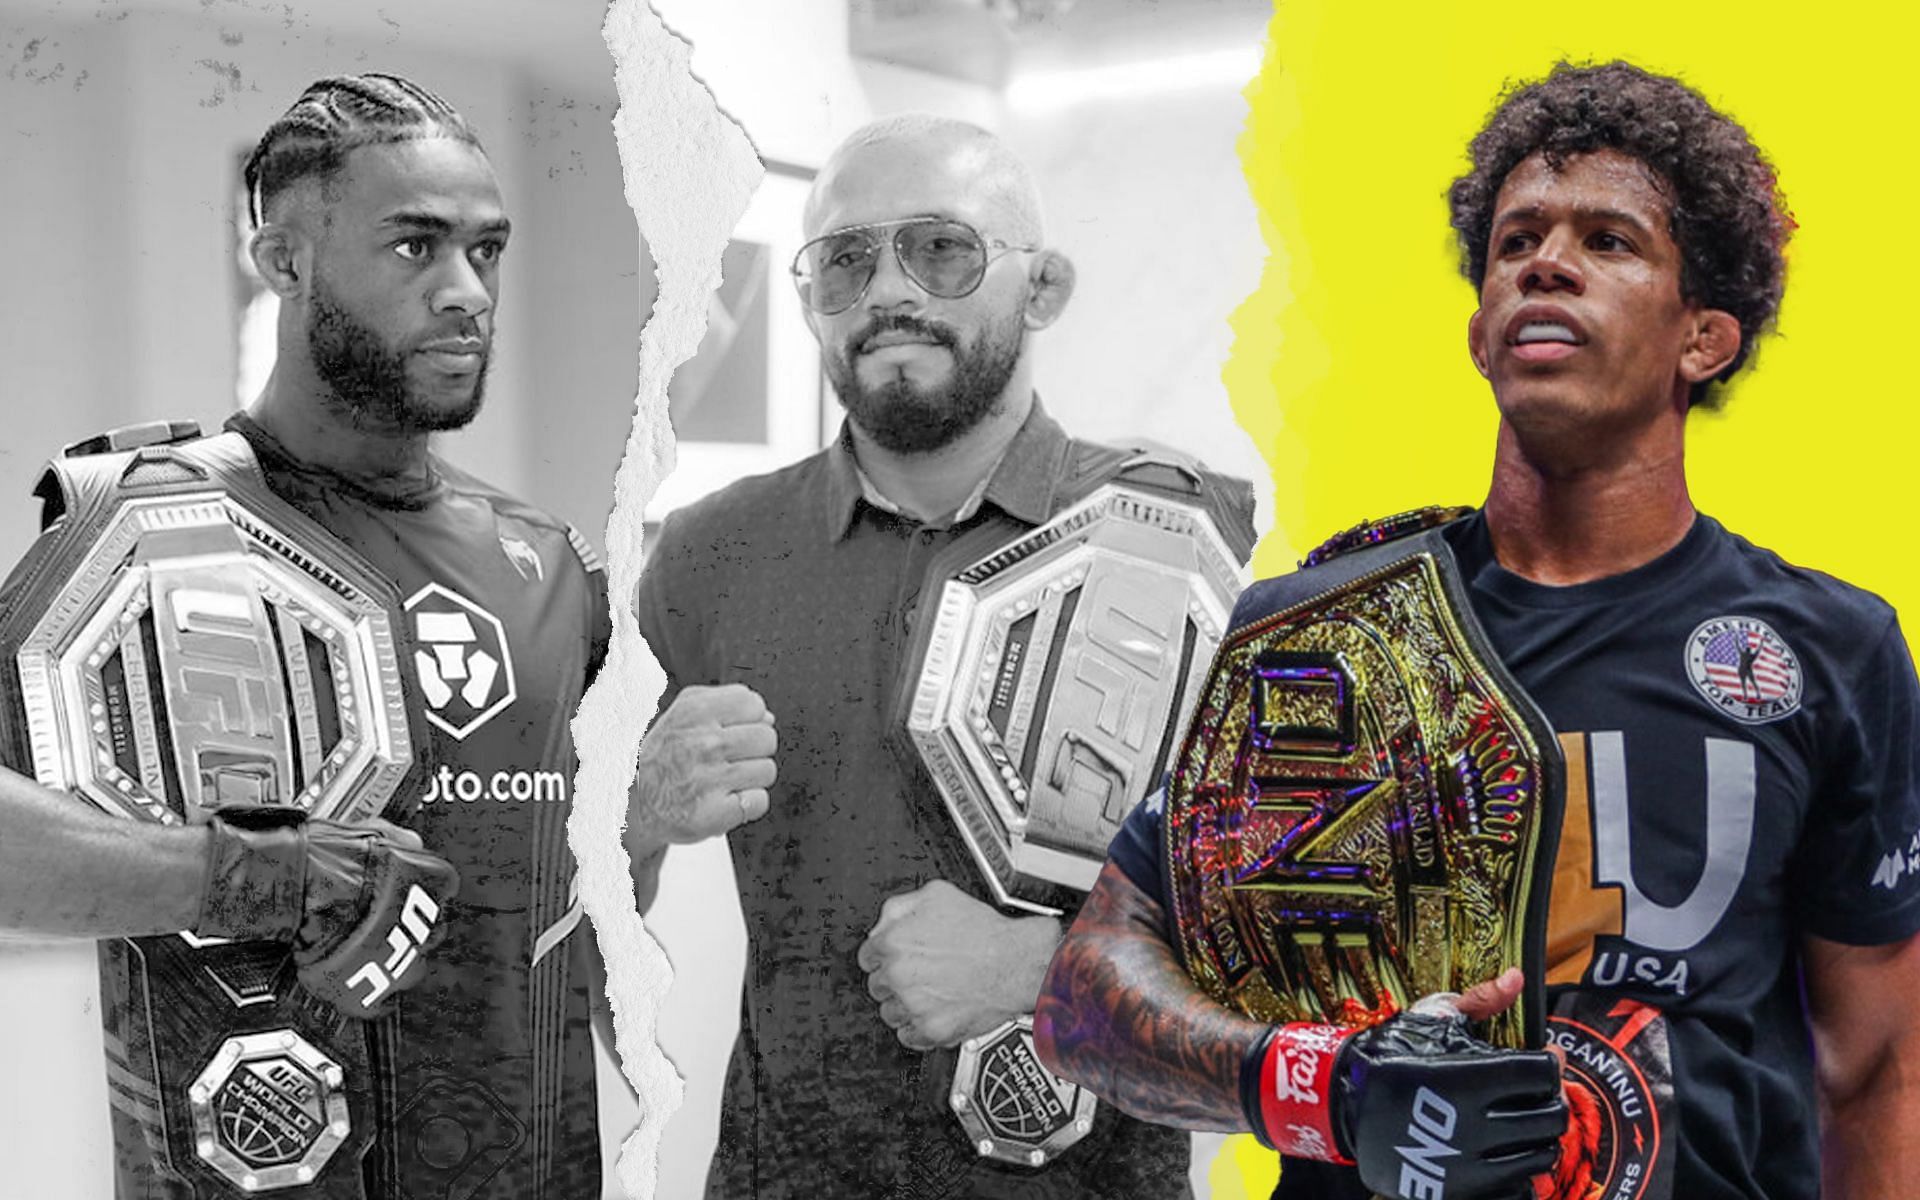 Adriano Moraes (R) believes he can win against UFC champs Deiveson Figueiredo (C) and Aljamain Sterling (L). | [Photos: @funkmastermma and @daico_deusdaguerra on Instagram/ONEChampionship]ONE Championship, @